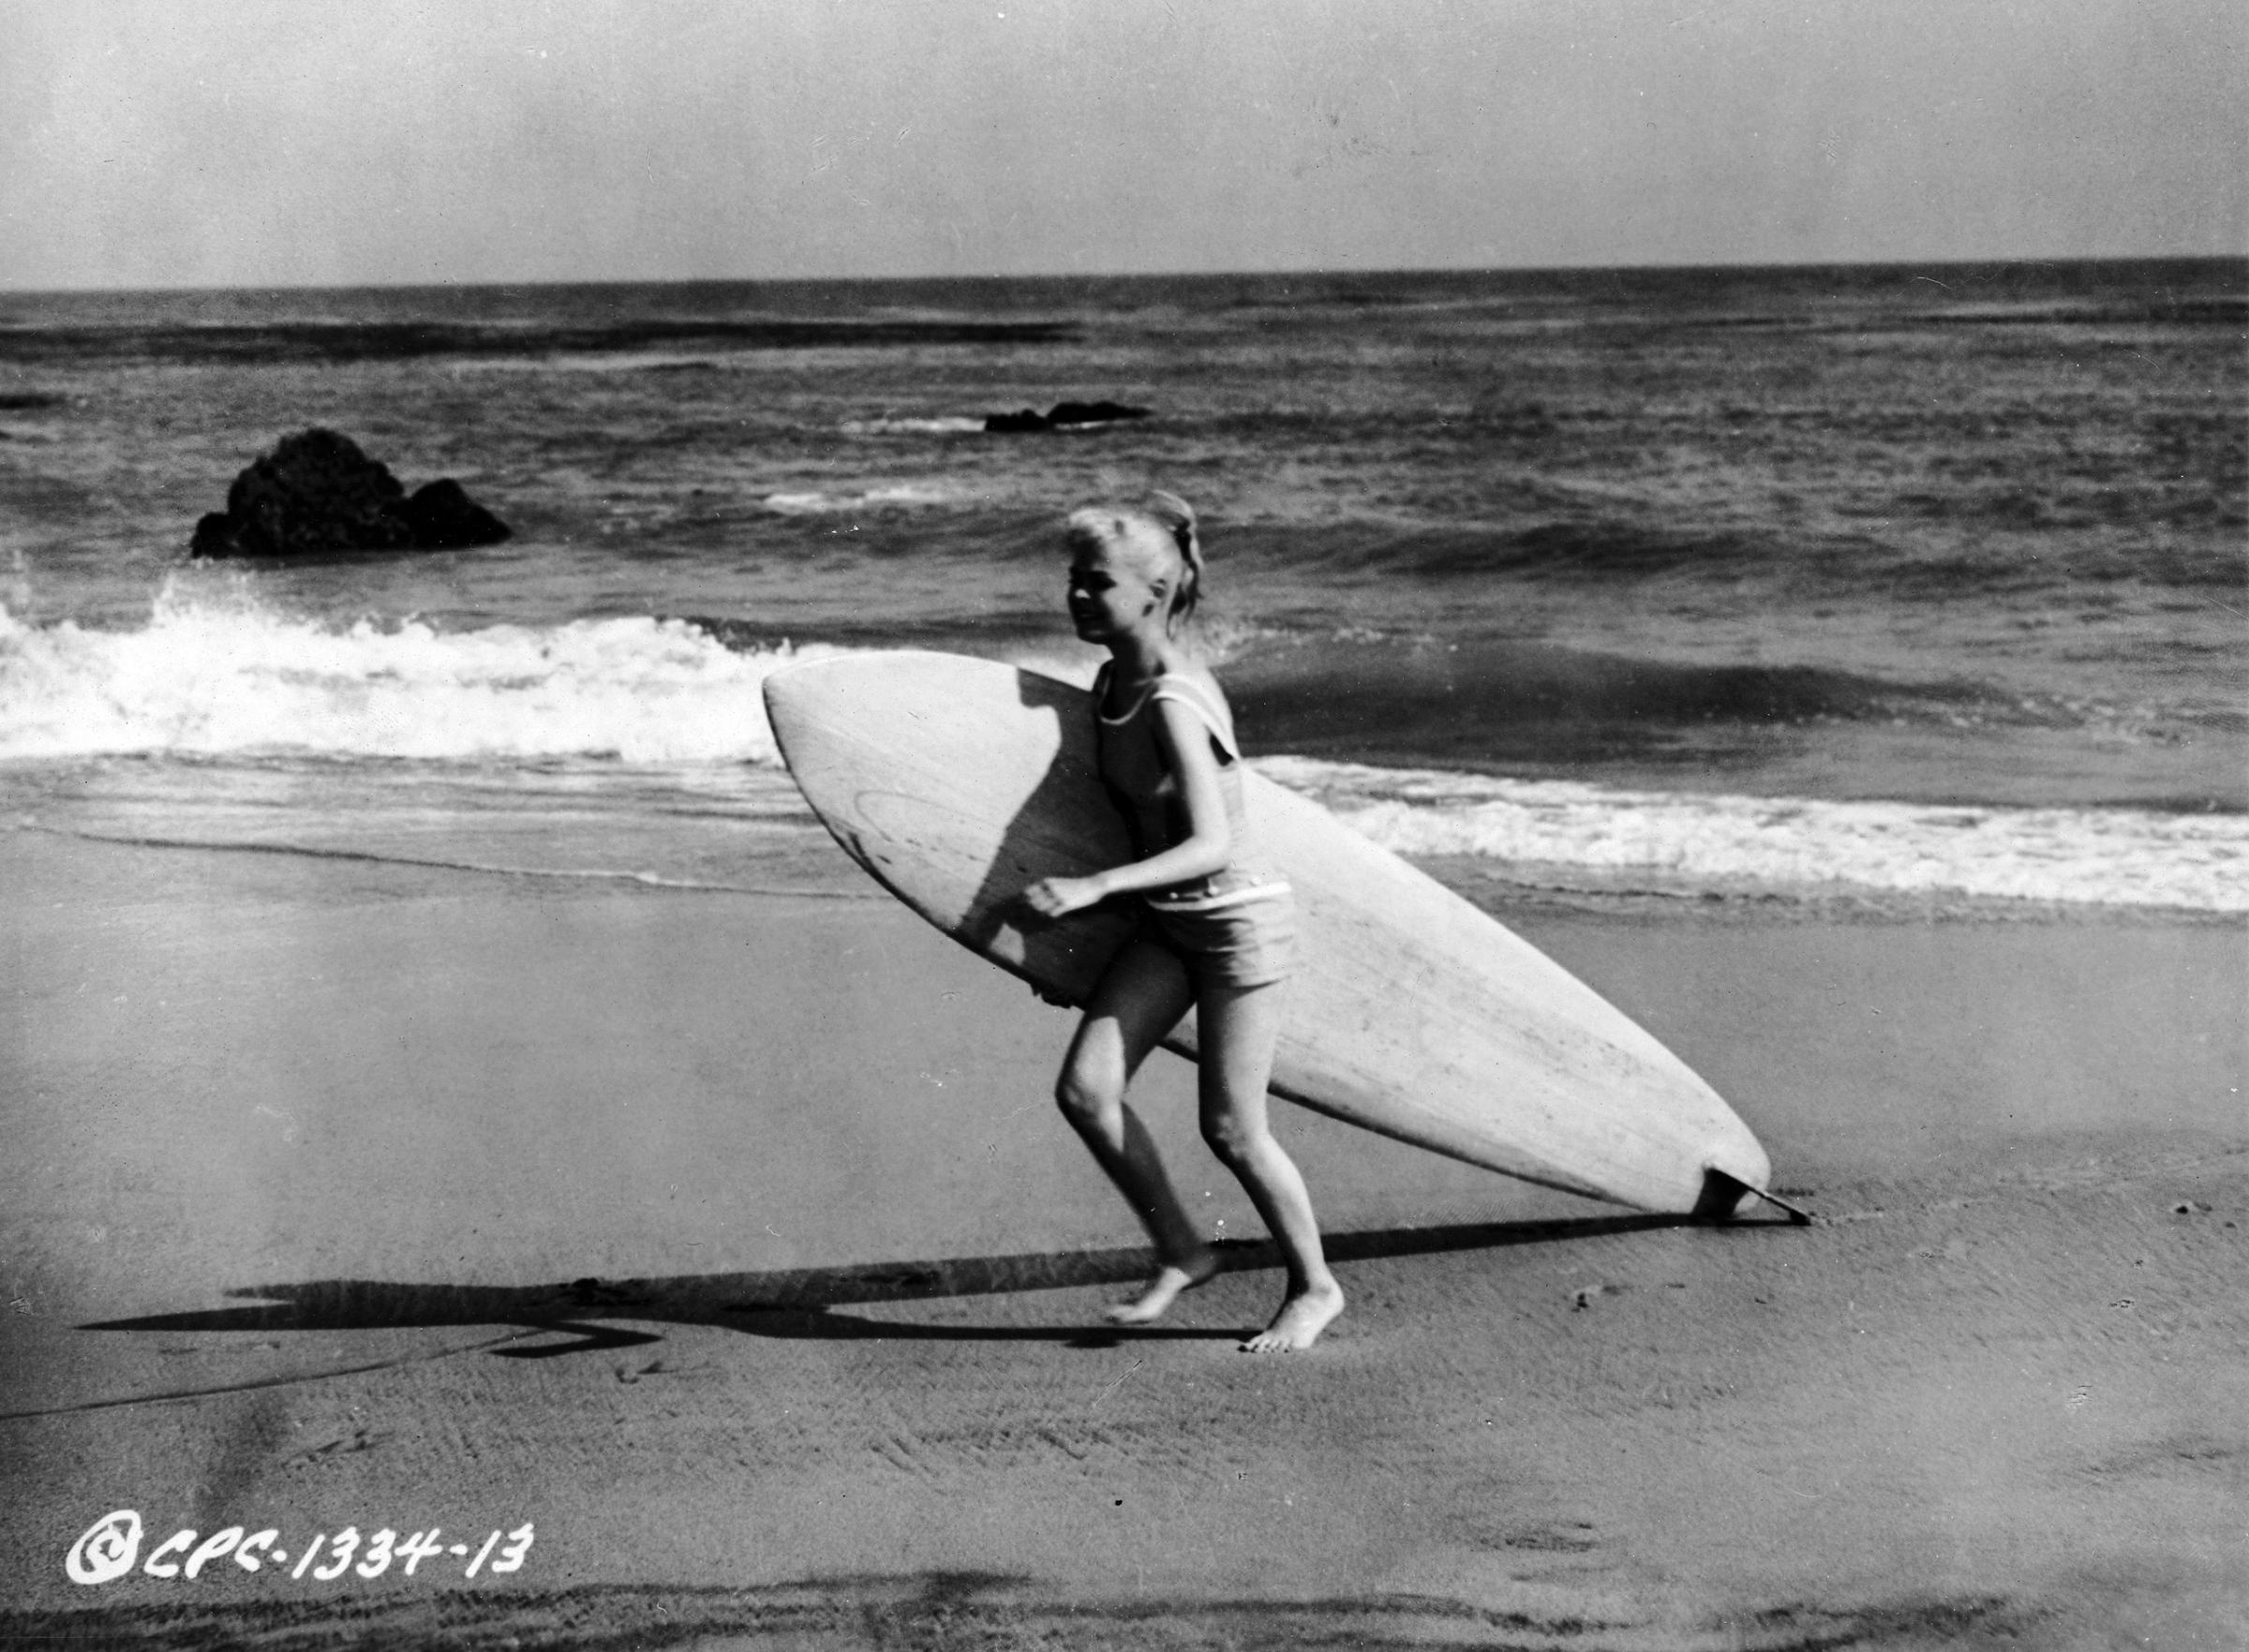 Vintage photos of surfer girls for International Surfing Day.